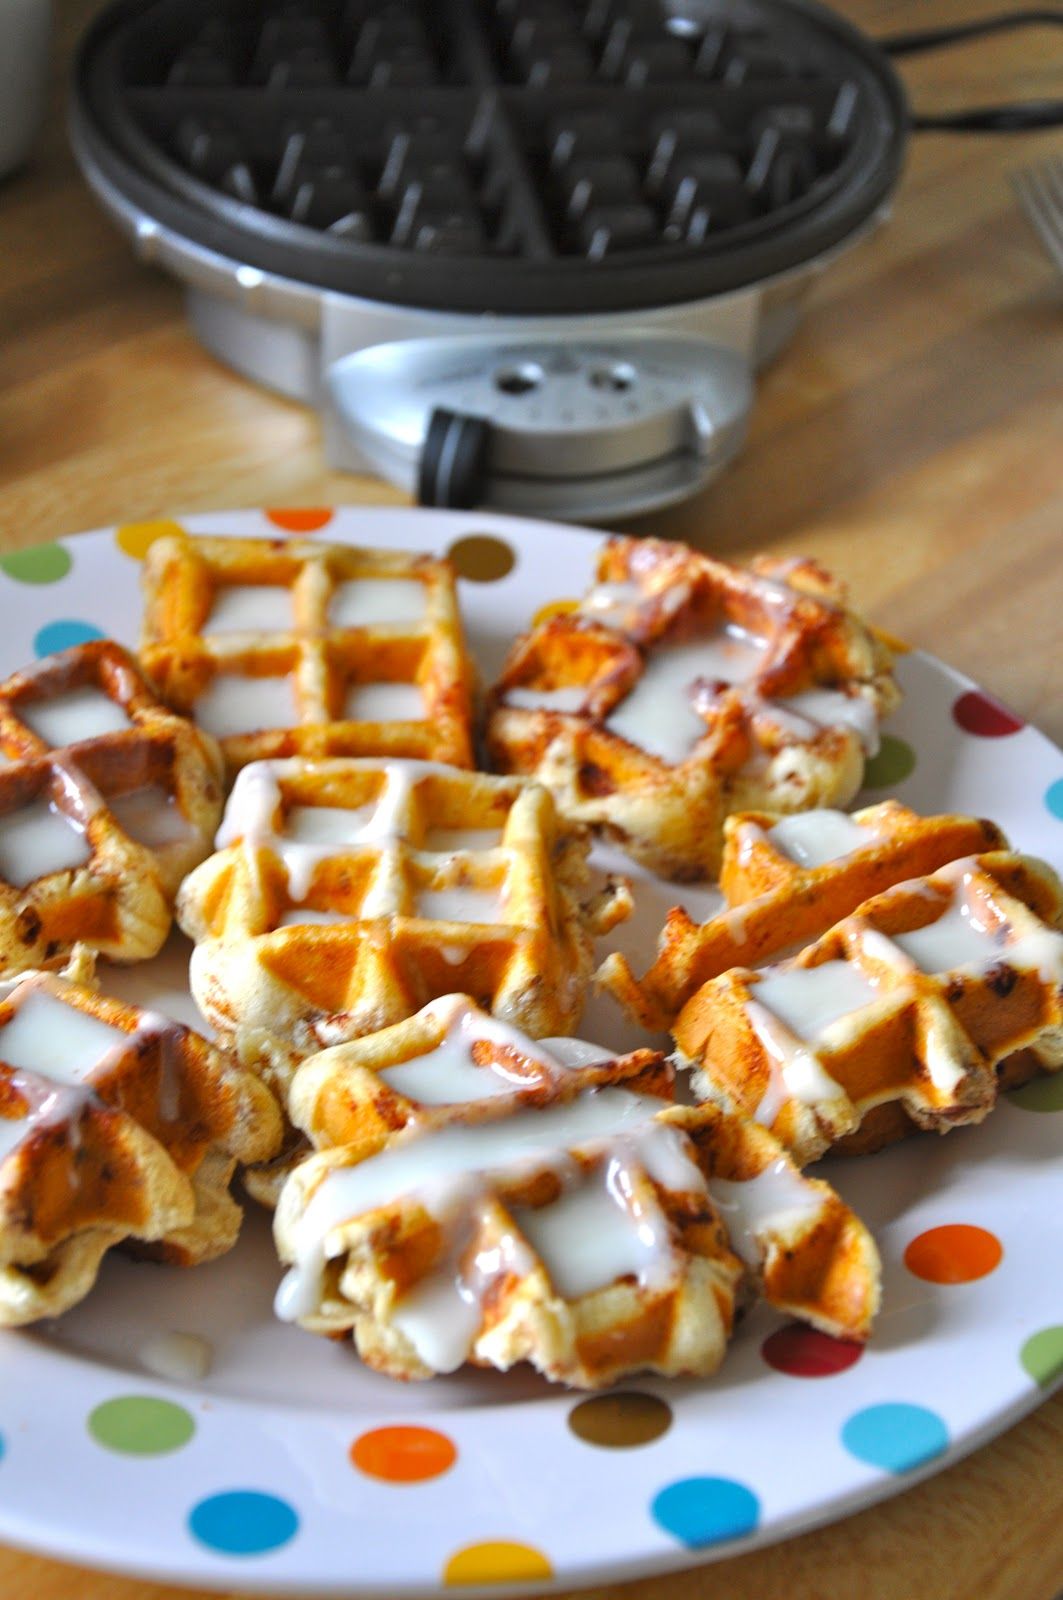 13 Awesome and Weird Waffle Irons to Make Breakfast More Fun